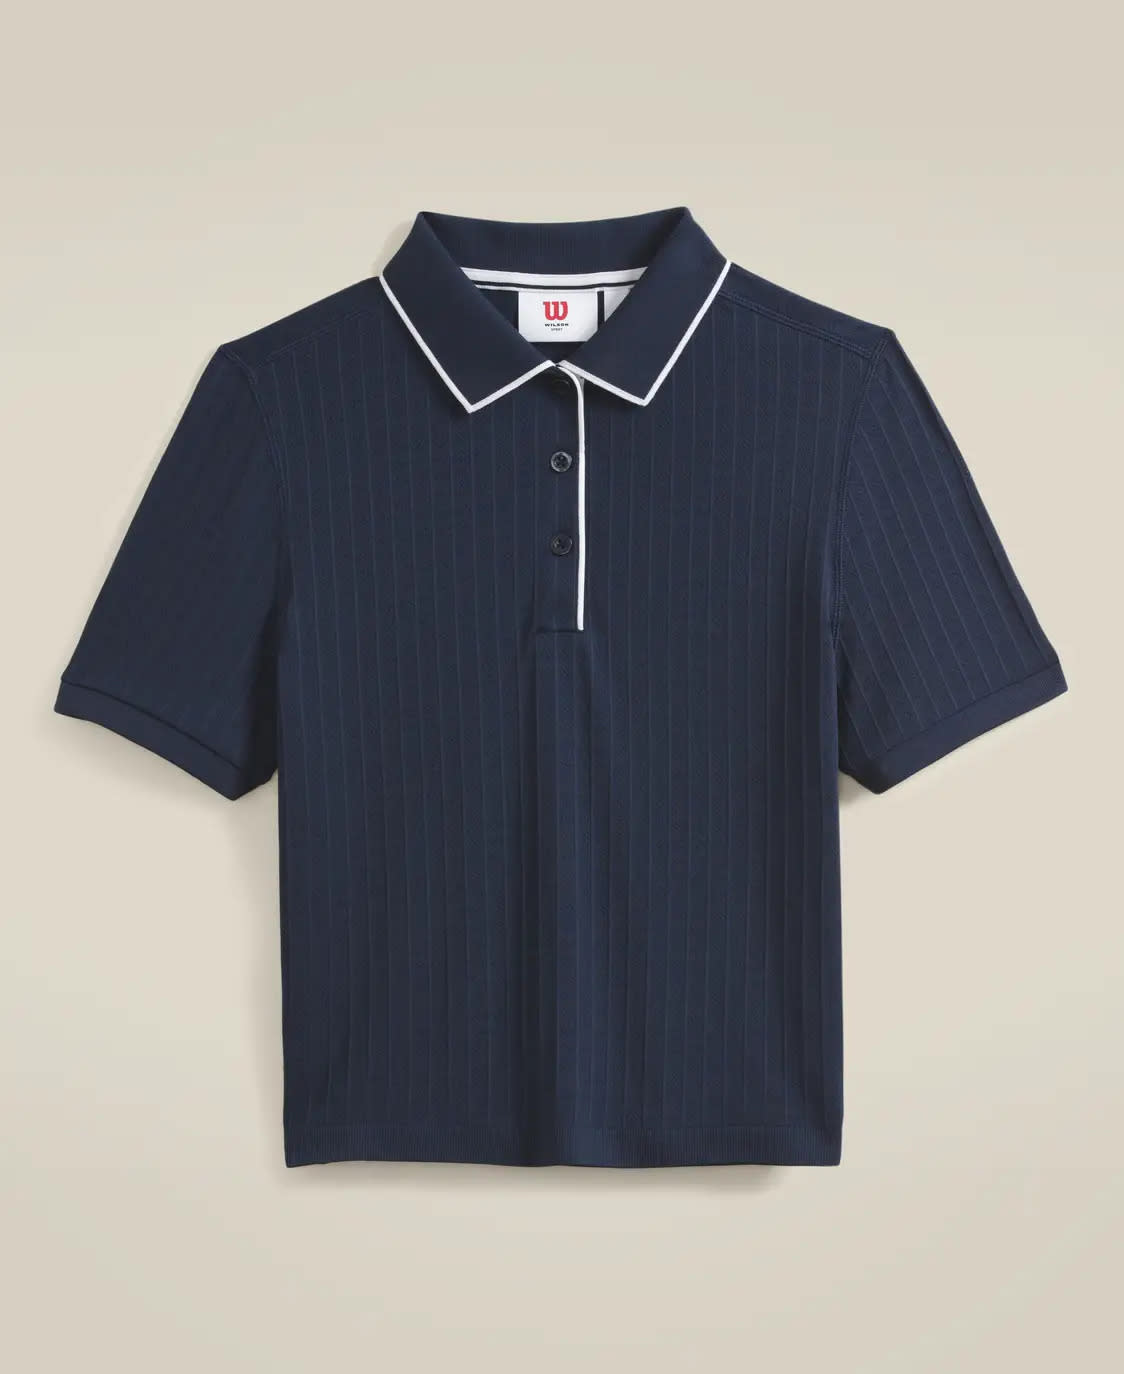 Navy blue polo with white trim at collar.